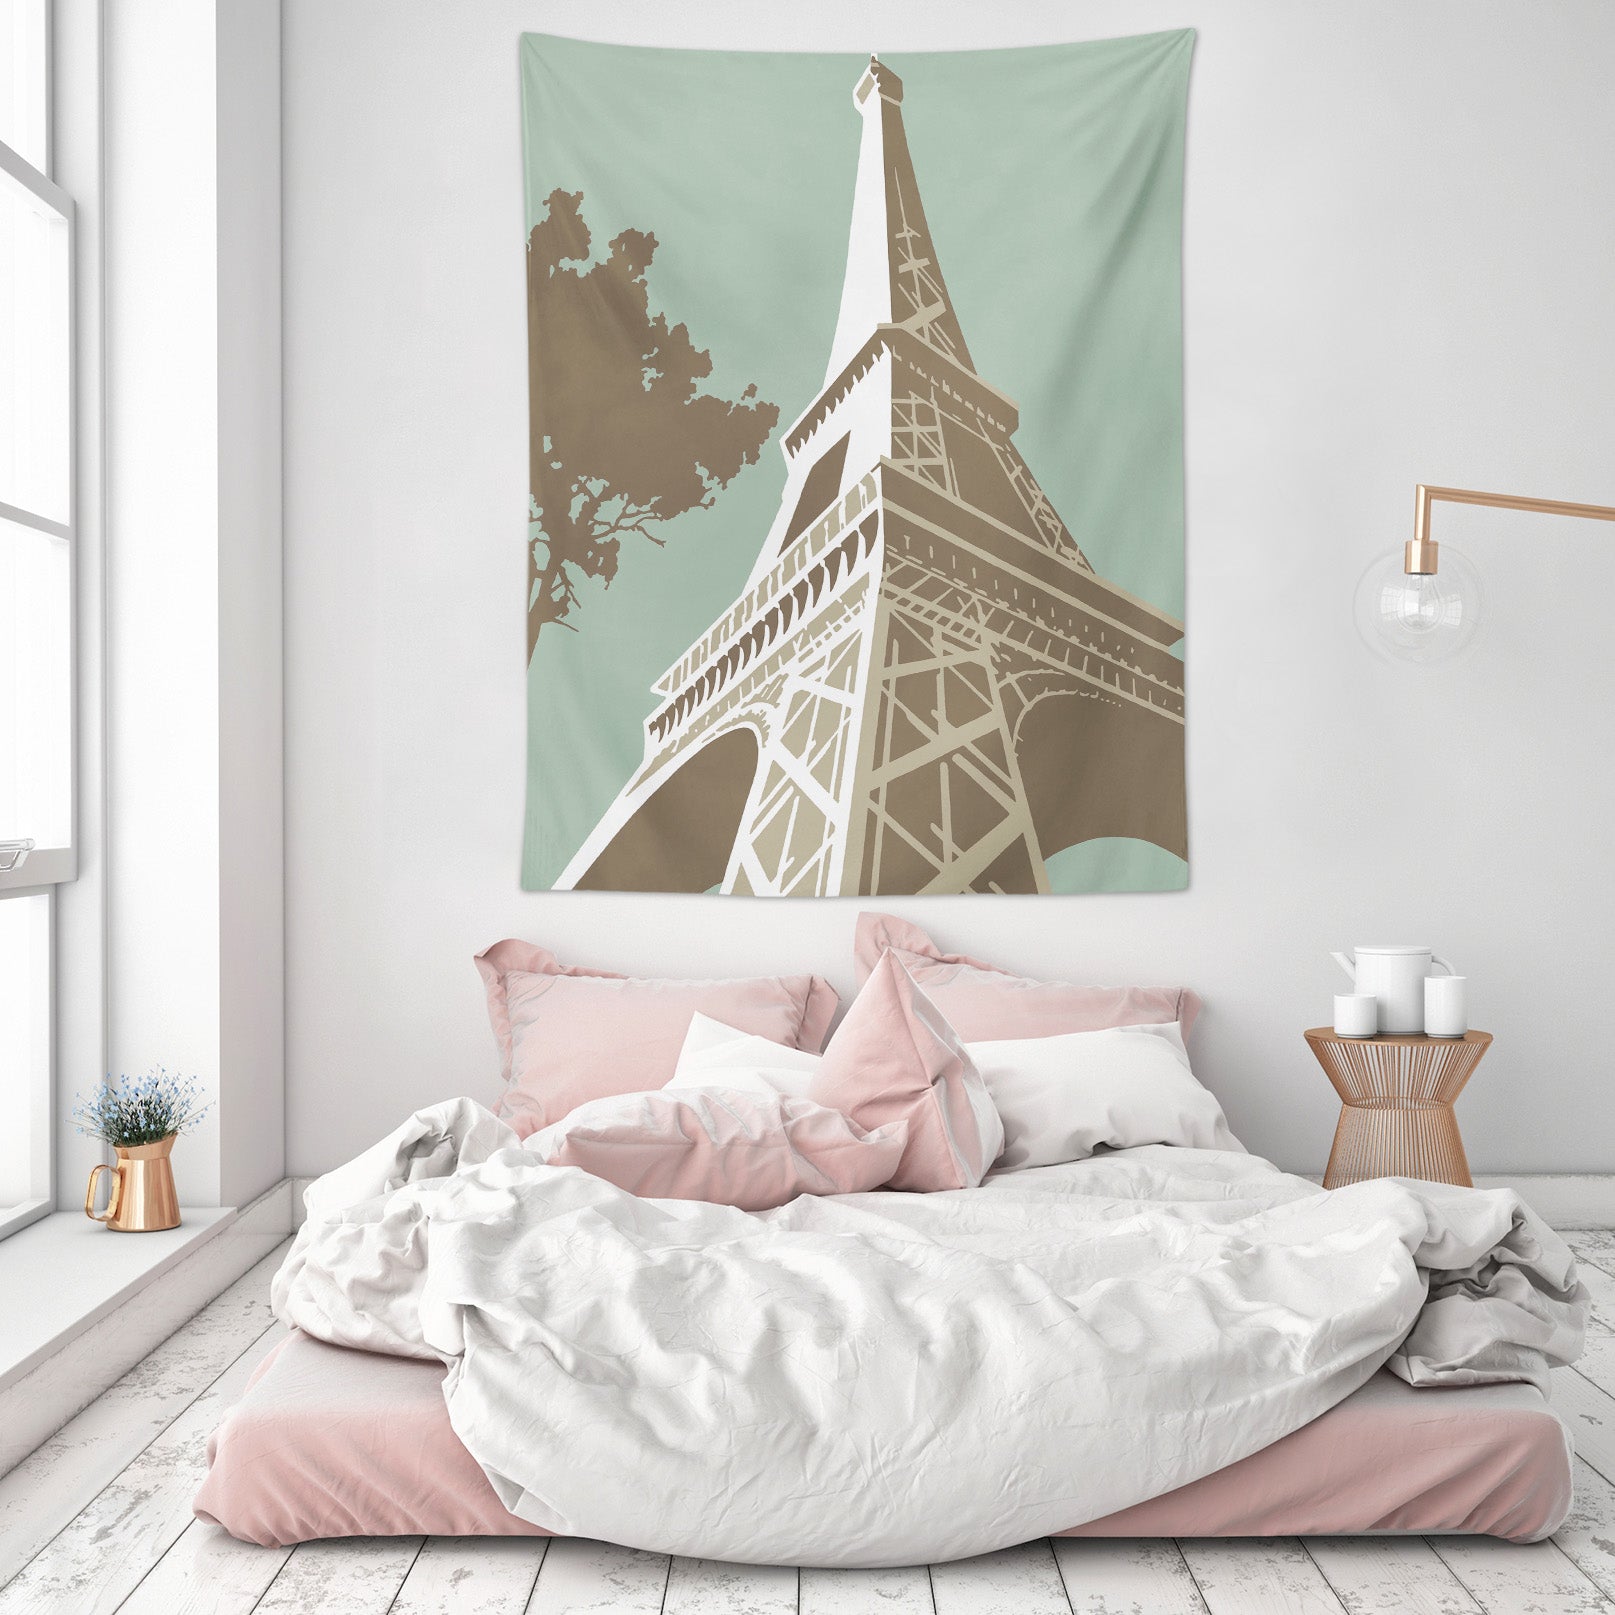 3D Eiffel Tower 5338 Steve Read Tapestry Hanging Cloth Hang